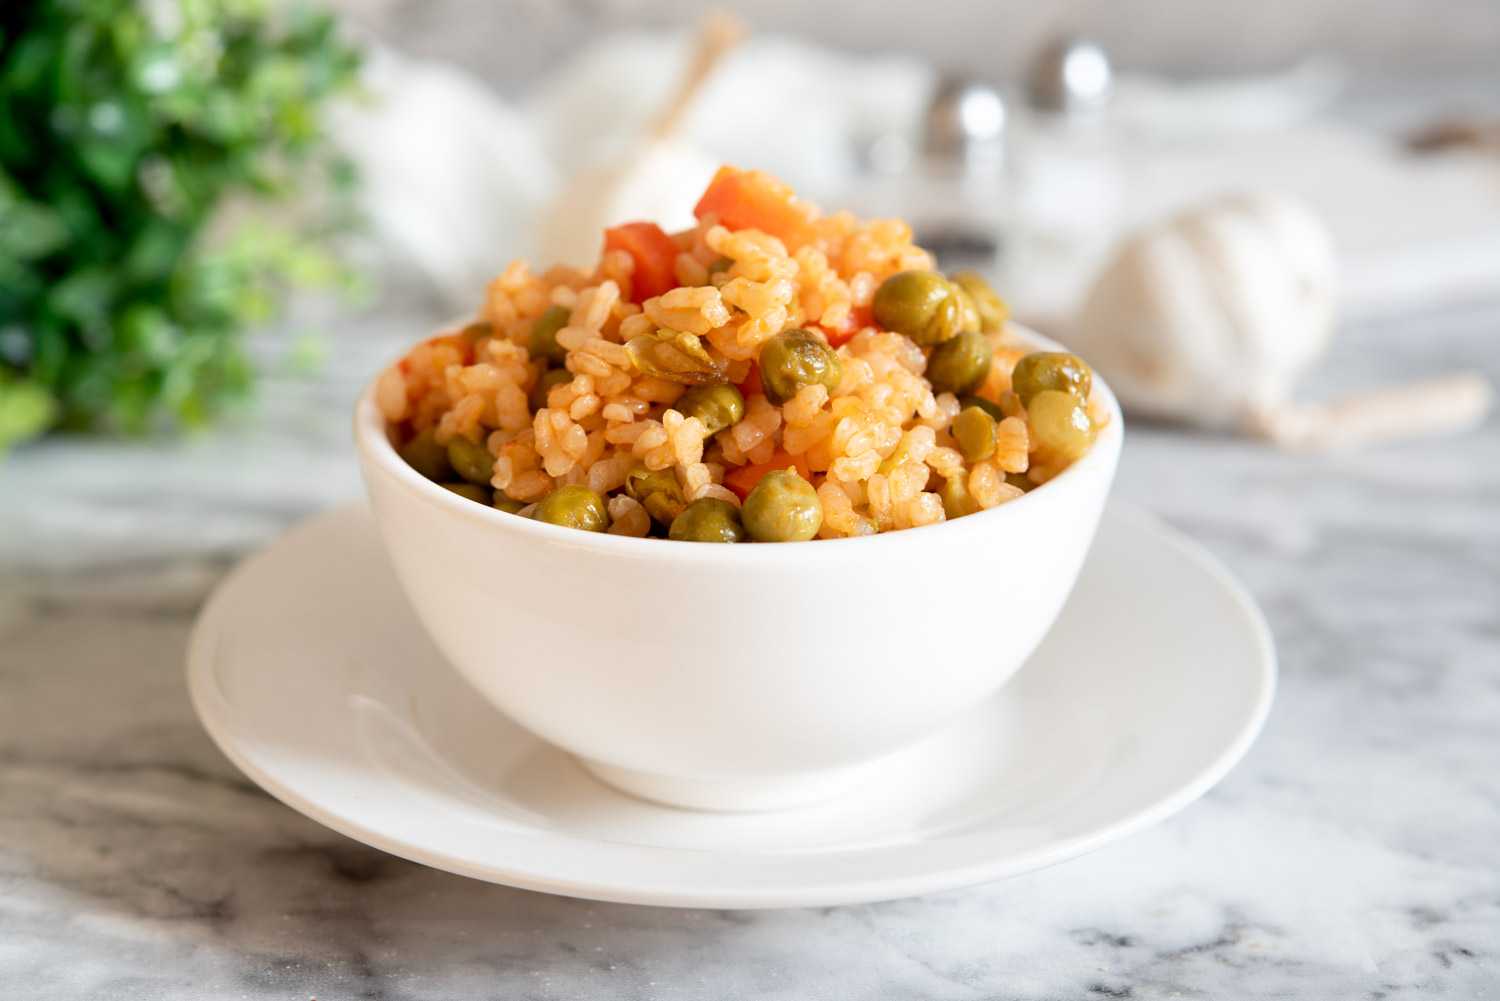 Rice mixed with peas, carrot cubes and spices in white bowl